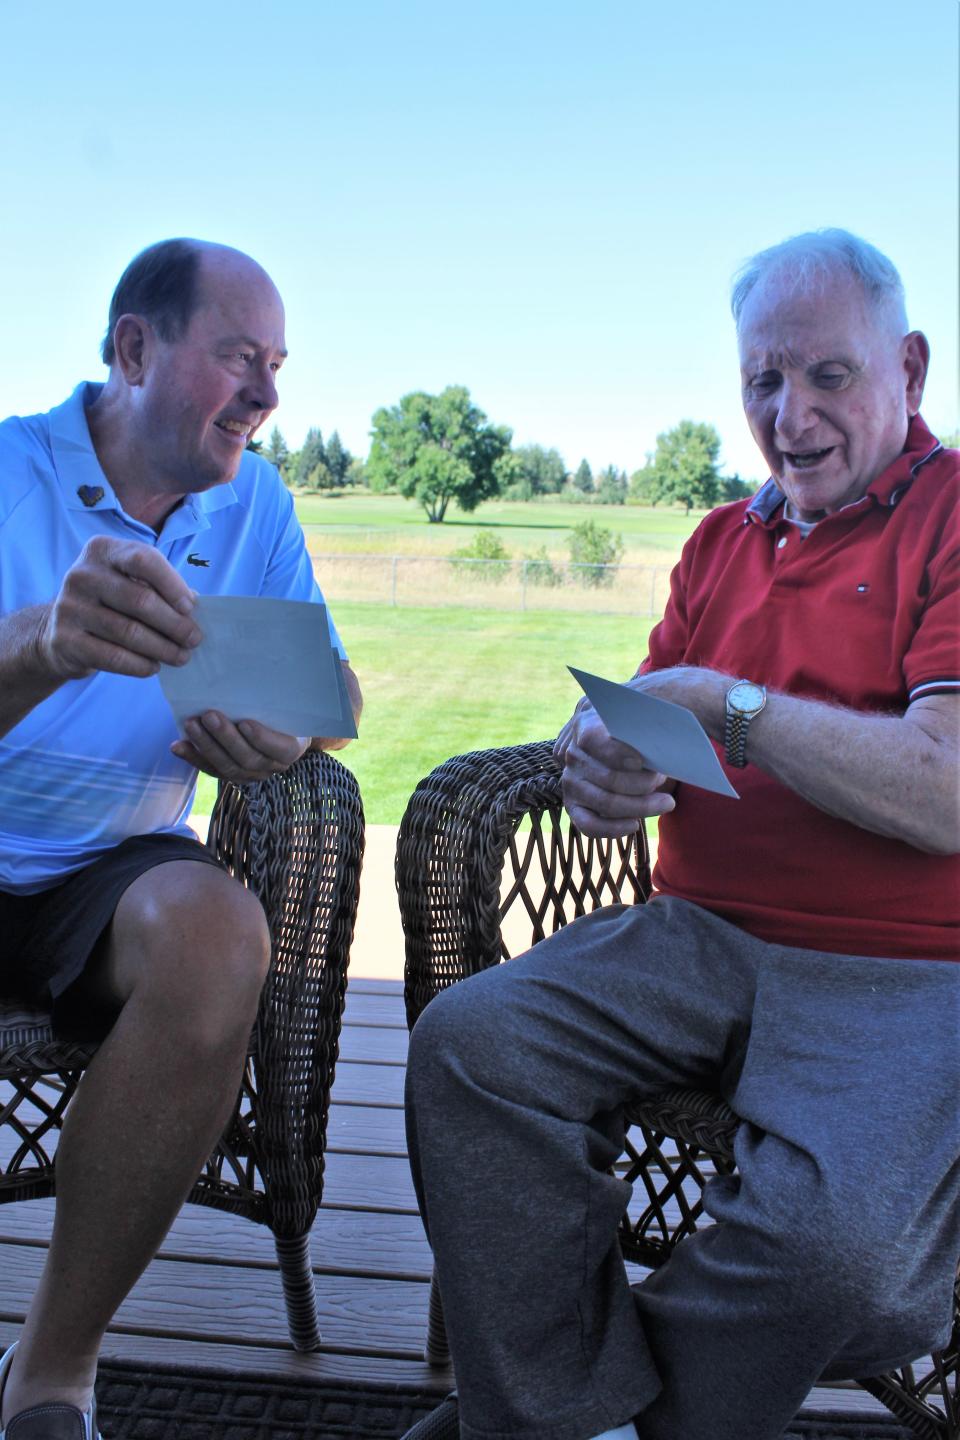 Loren Oelkers (left) and Rick Goff creating new memories at Goff's daughter's house in Great Falls. Goff helped save Oelkers life 50 years ago.